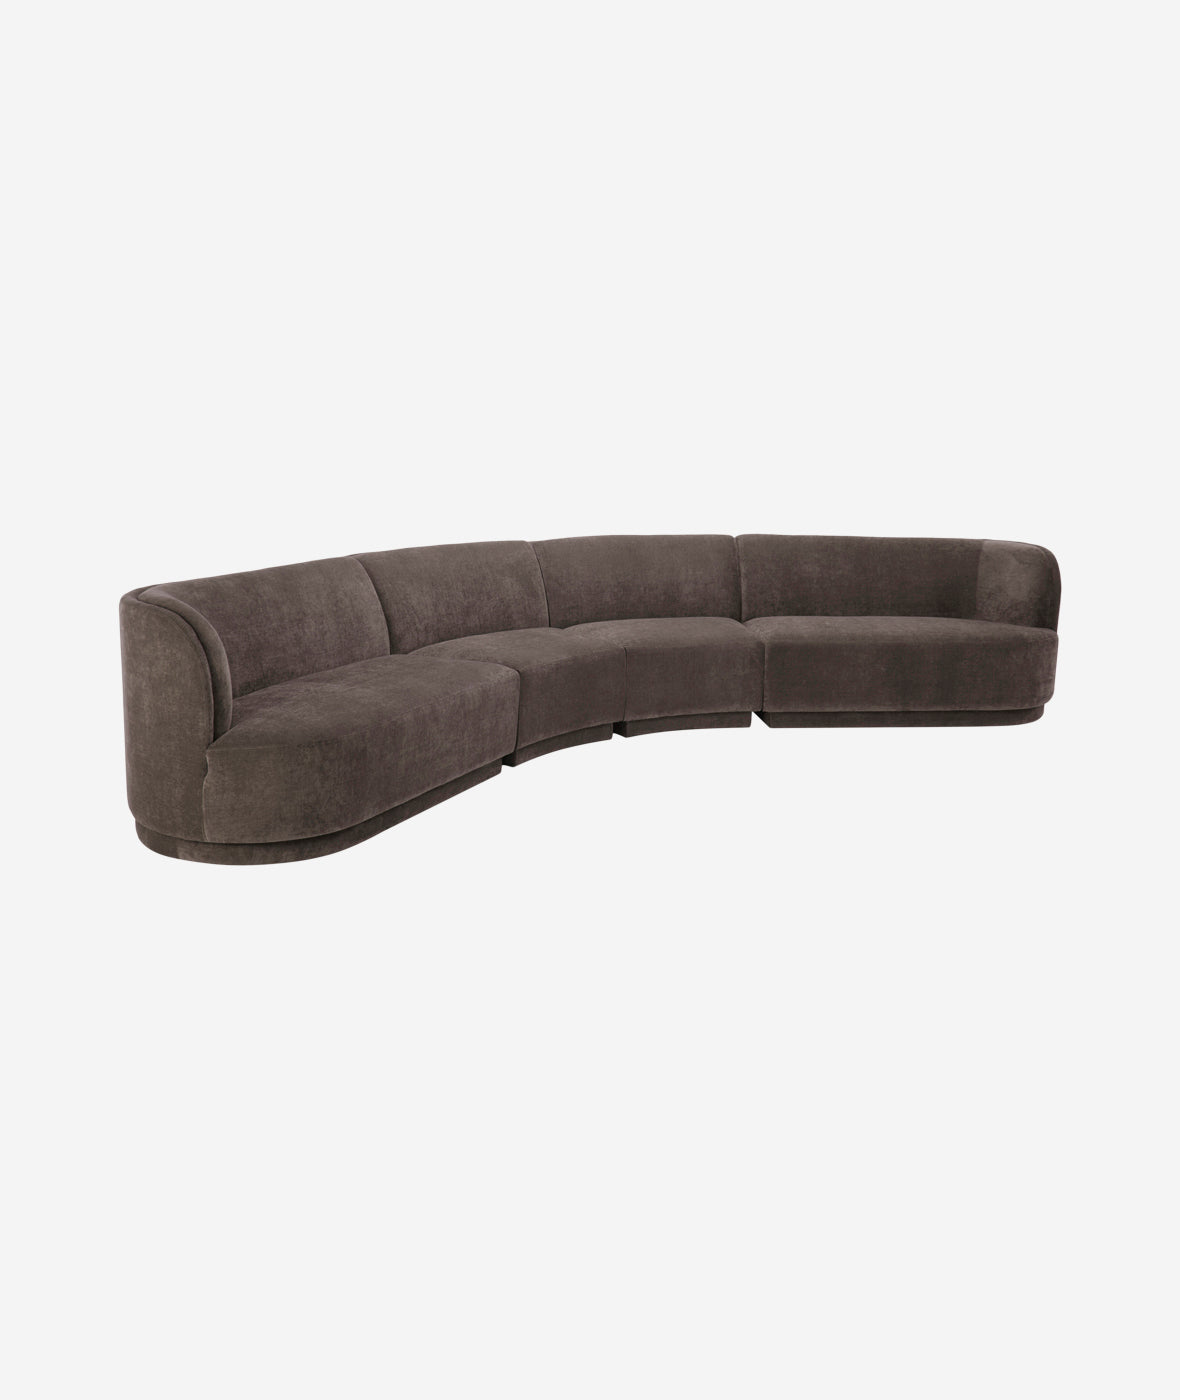 Yoon Eclipse Sectional - Umbra Rust